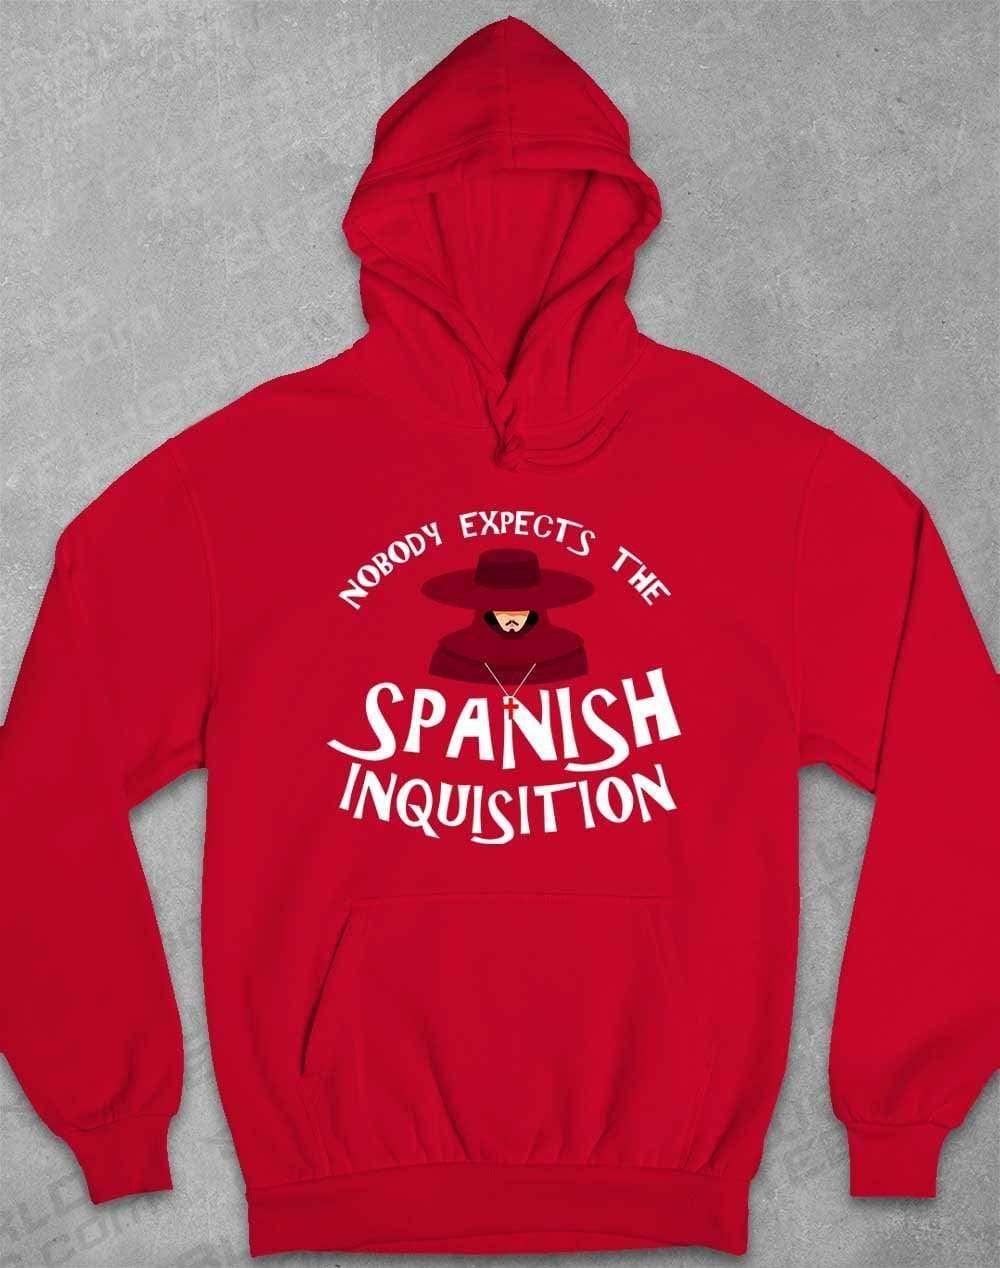 Nobody Expects the Spanish Inquisition Hoodie XS / Fire Red  - Off World Tees